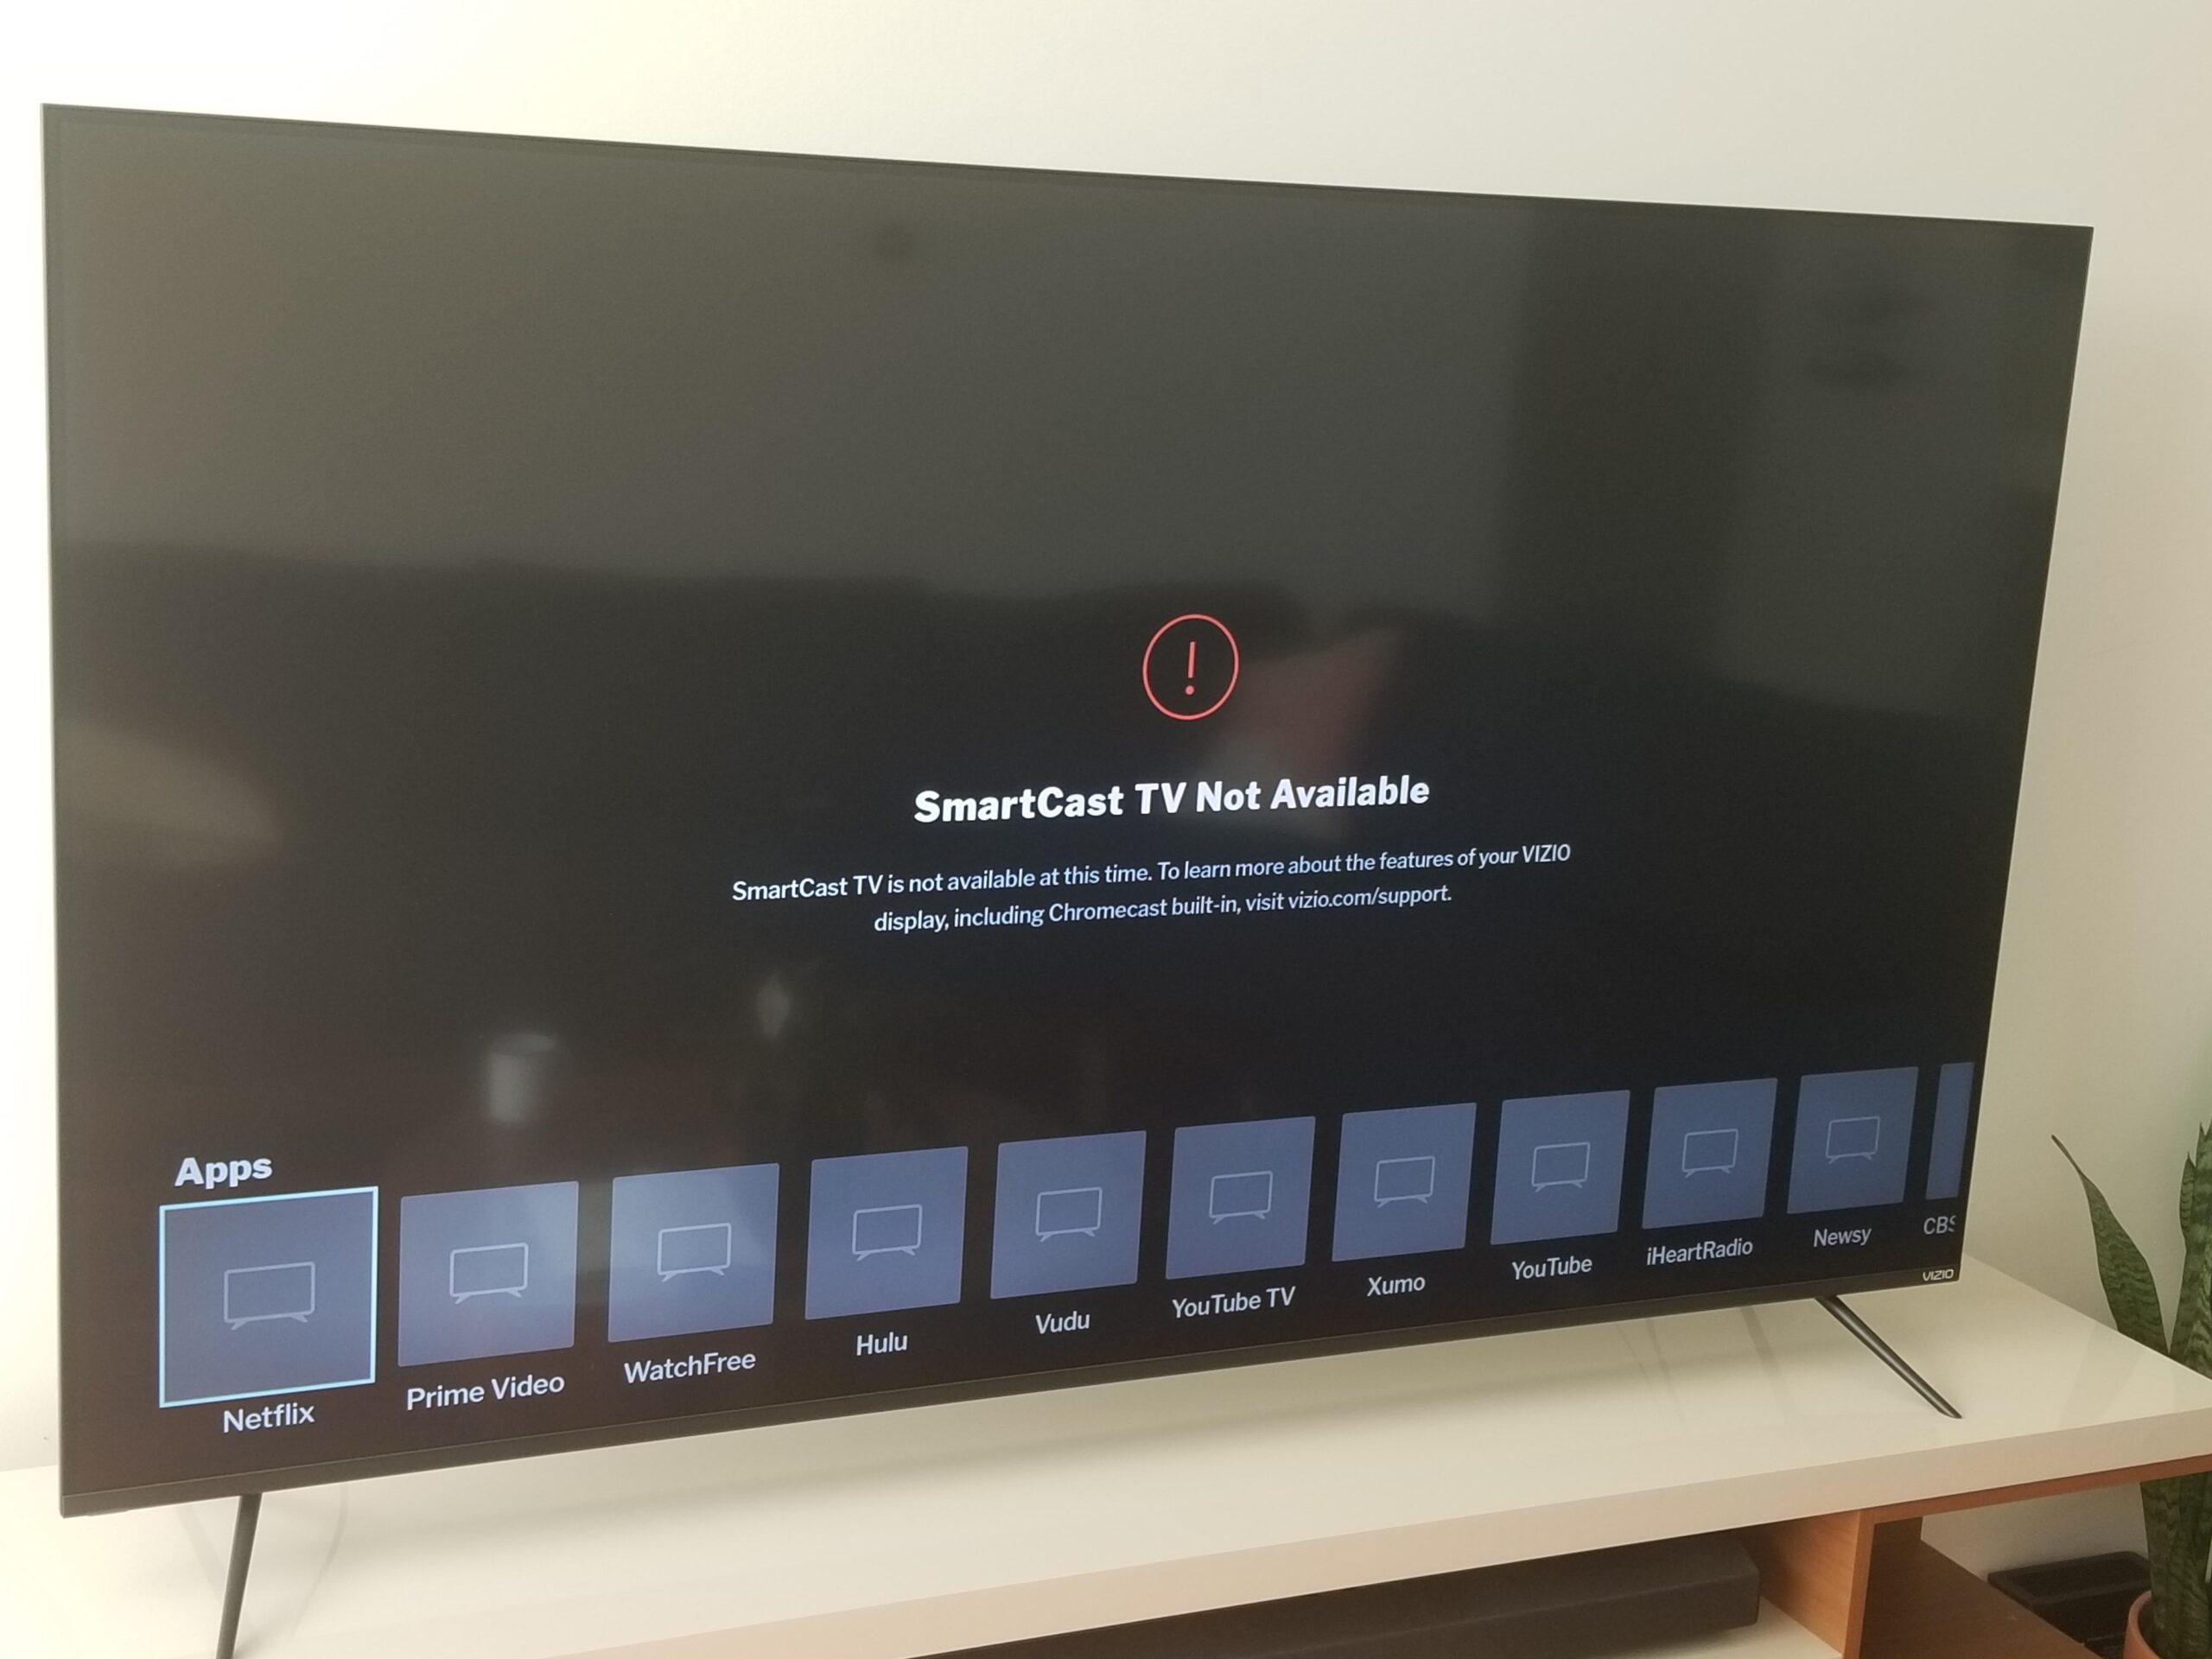 how to project windows 10 display on vizio smart cast